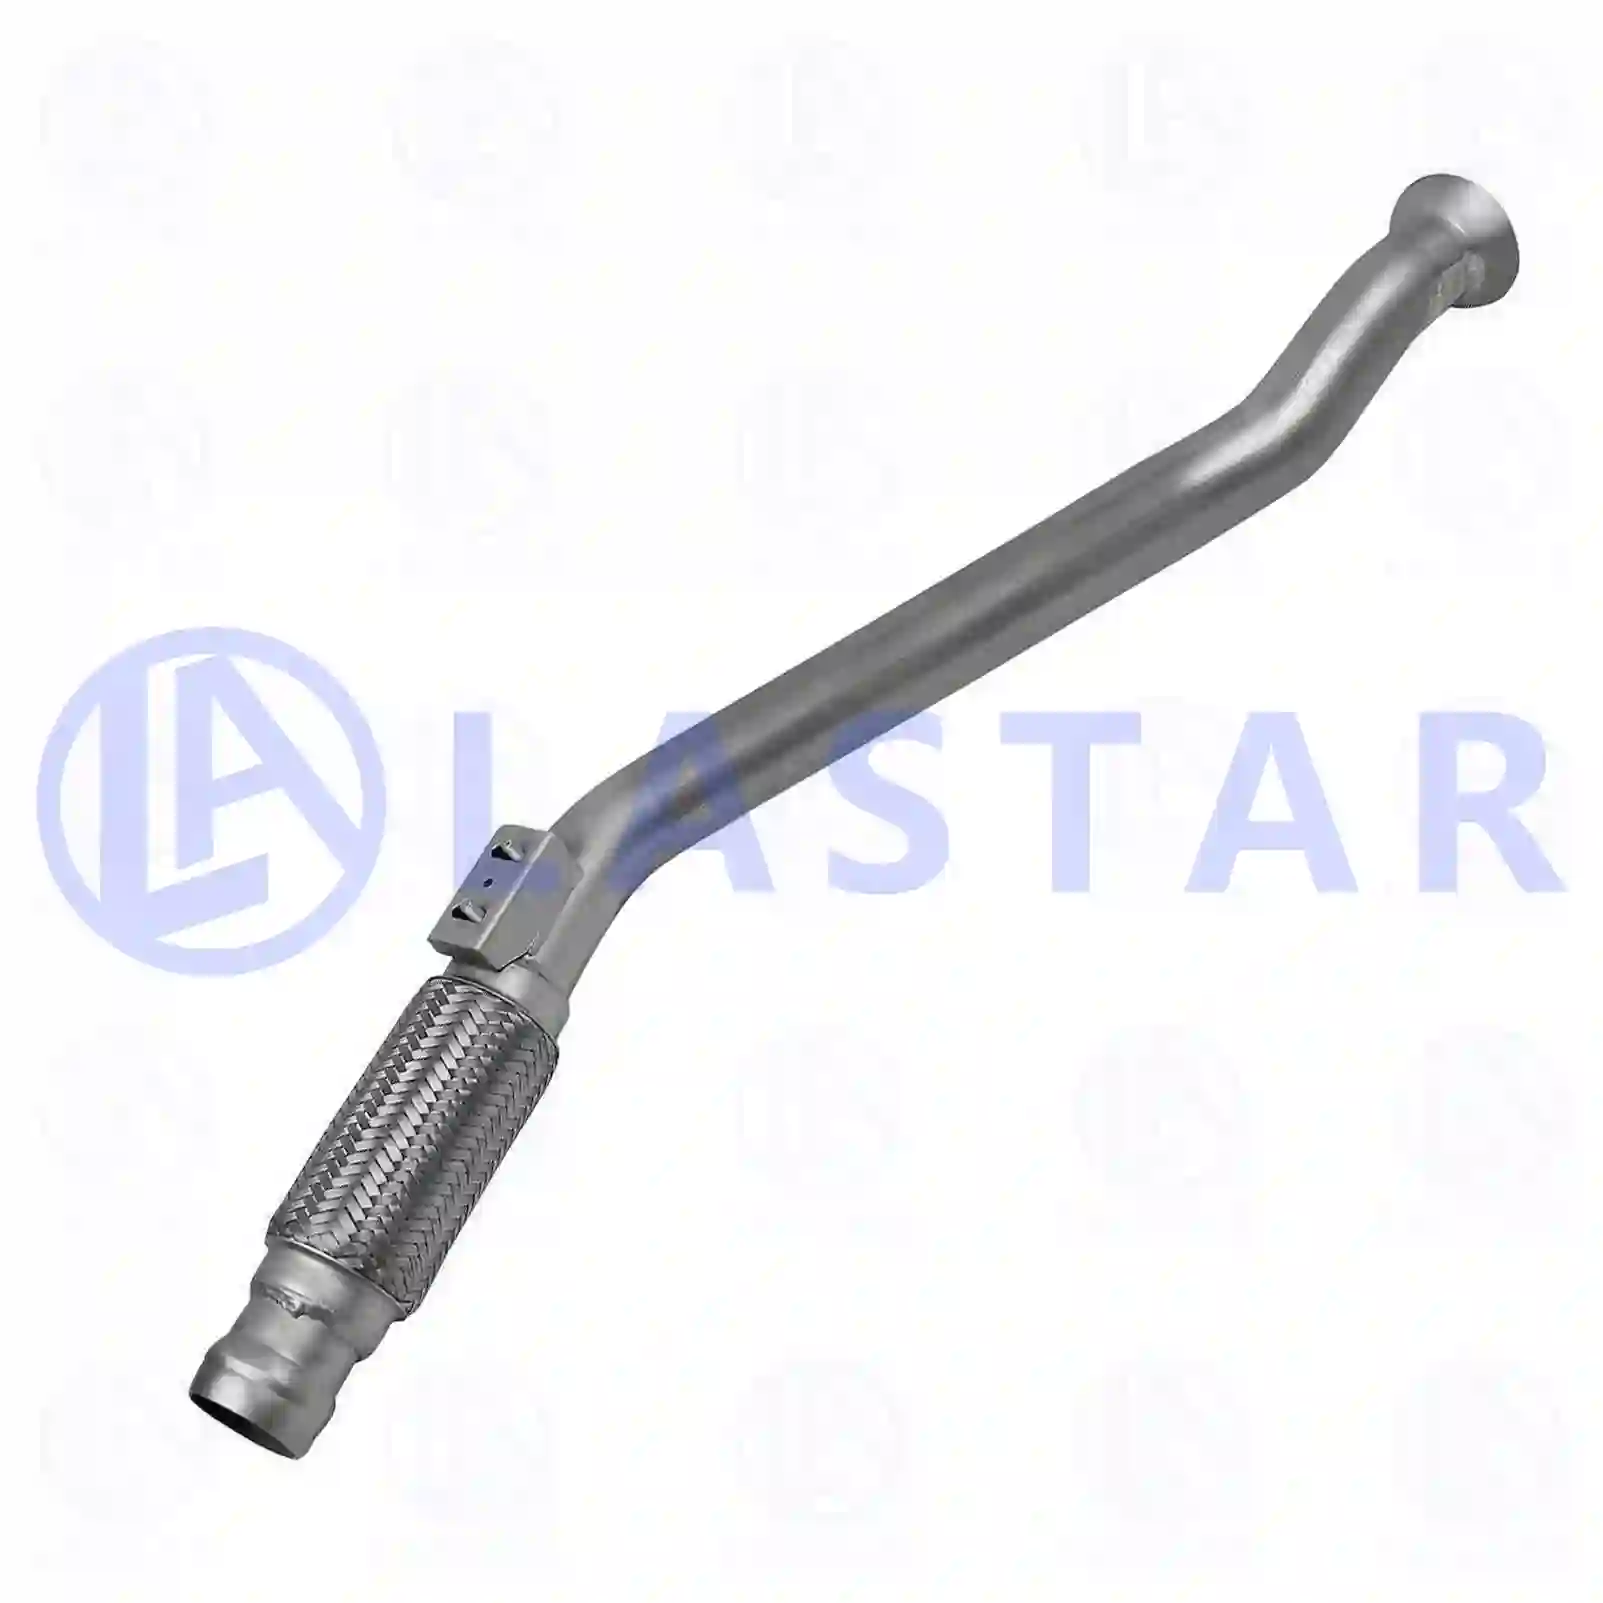 Exhaust pipe, 77706383, 9064901981 ||  77706383 Lastar Spare Part | Truck Spare Parts, Auotomotive Spare Parts Exhaust pipe, 77706383, 9064901981 ||  77706383 Lastar Spare Part | Truck Spare Parts, Auotomotive Spare Parts